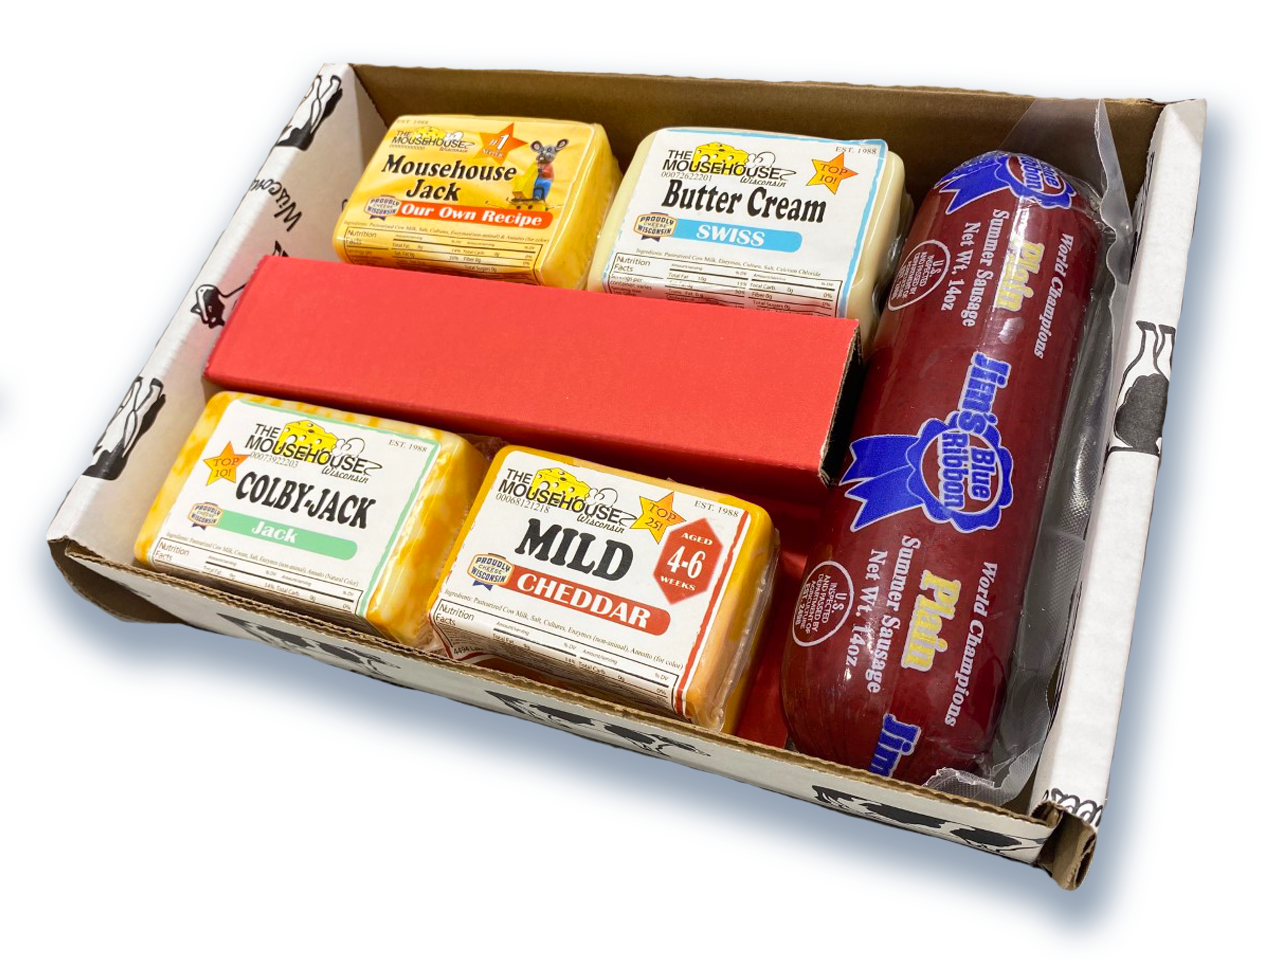 Mousehouse Jack Cheese (Exclusive!), – Mousehouse Cheesehaus